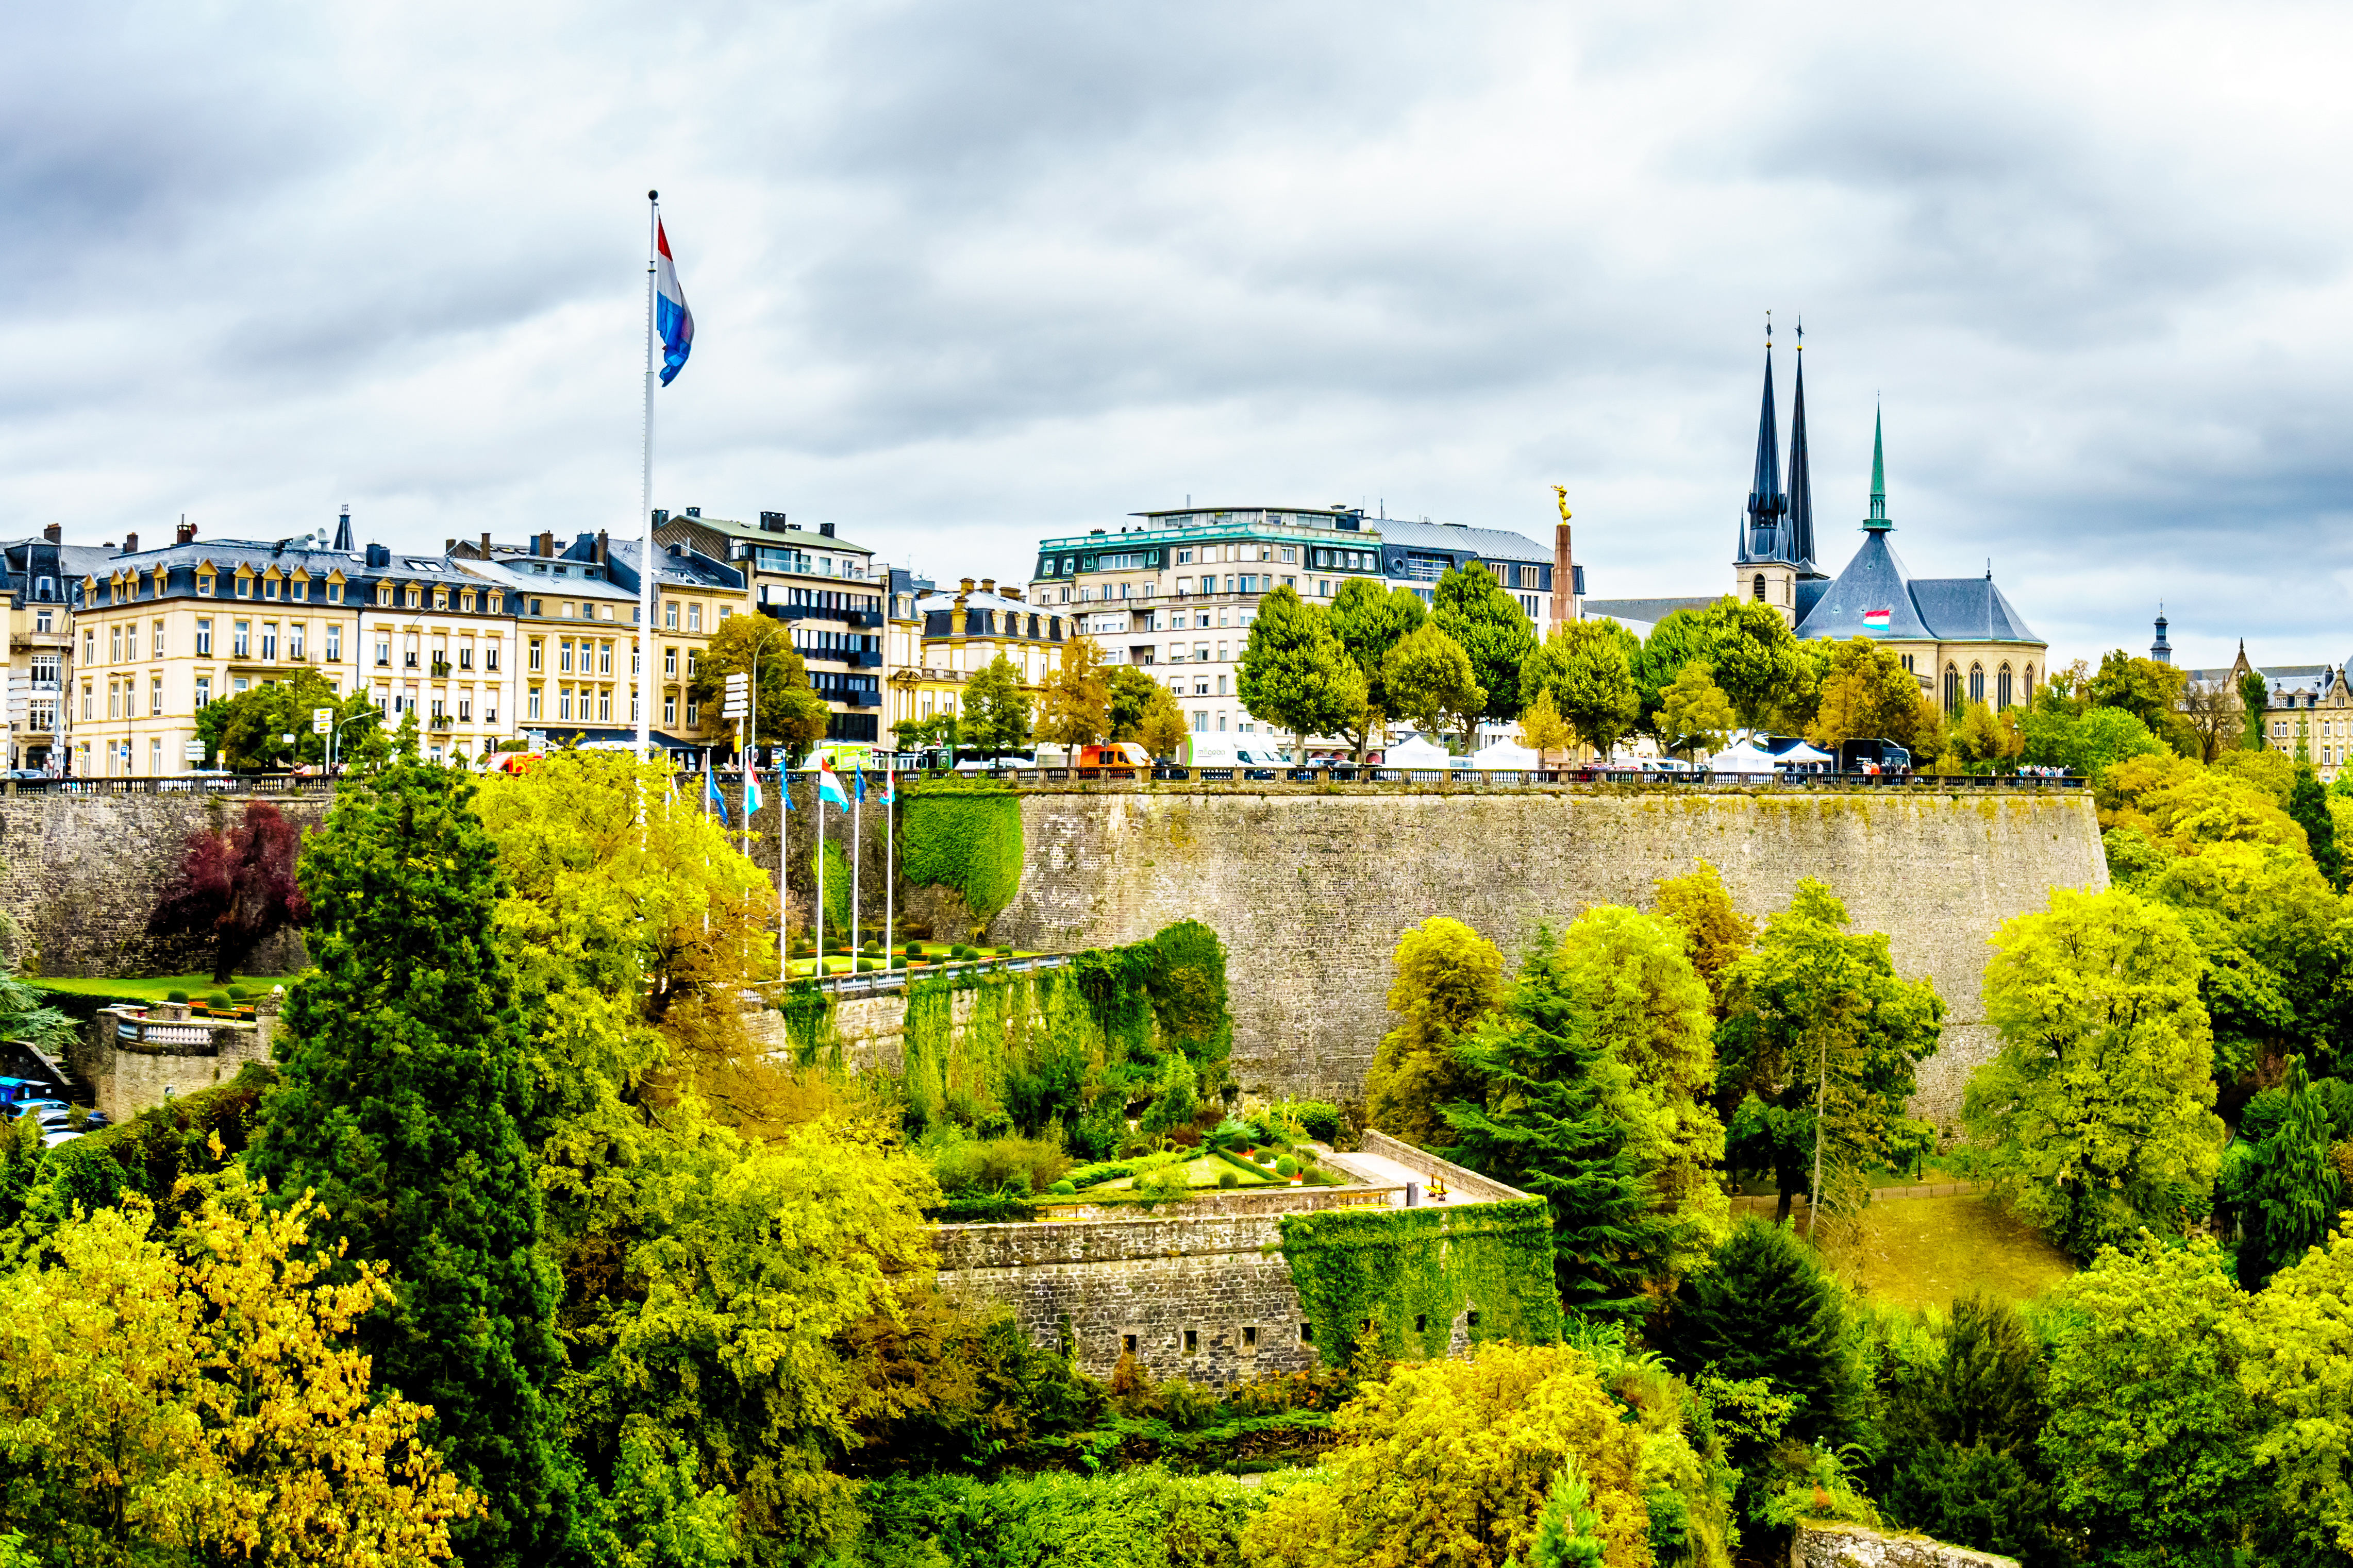 Luxembourg residence permit allows foreigners to live in a European country